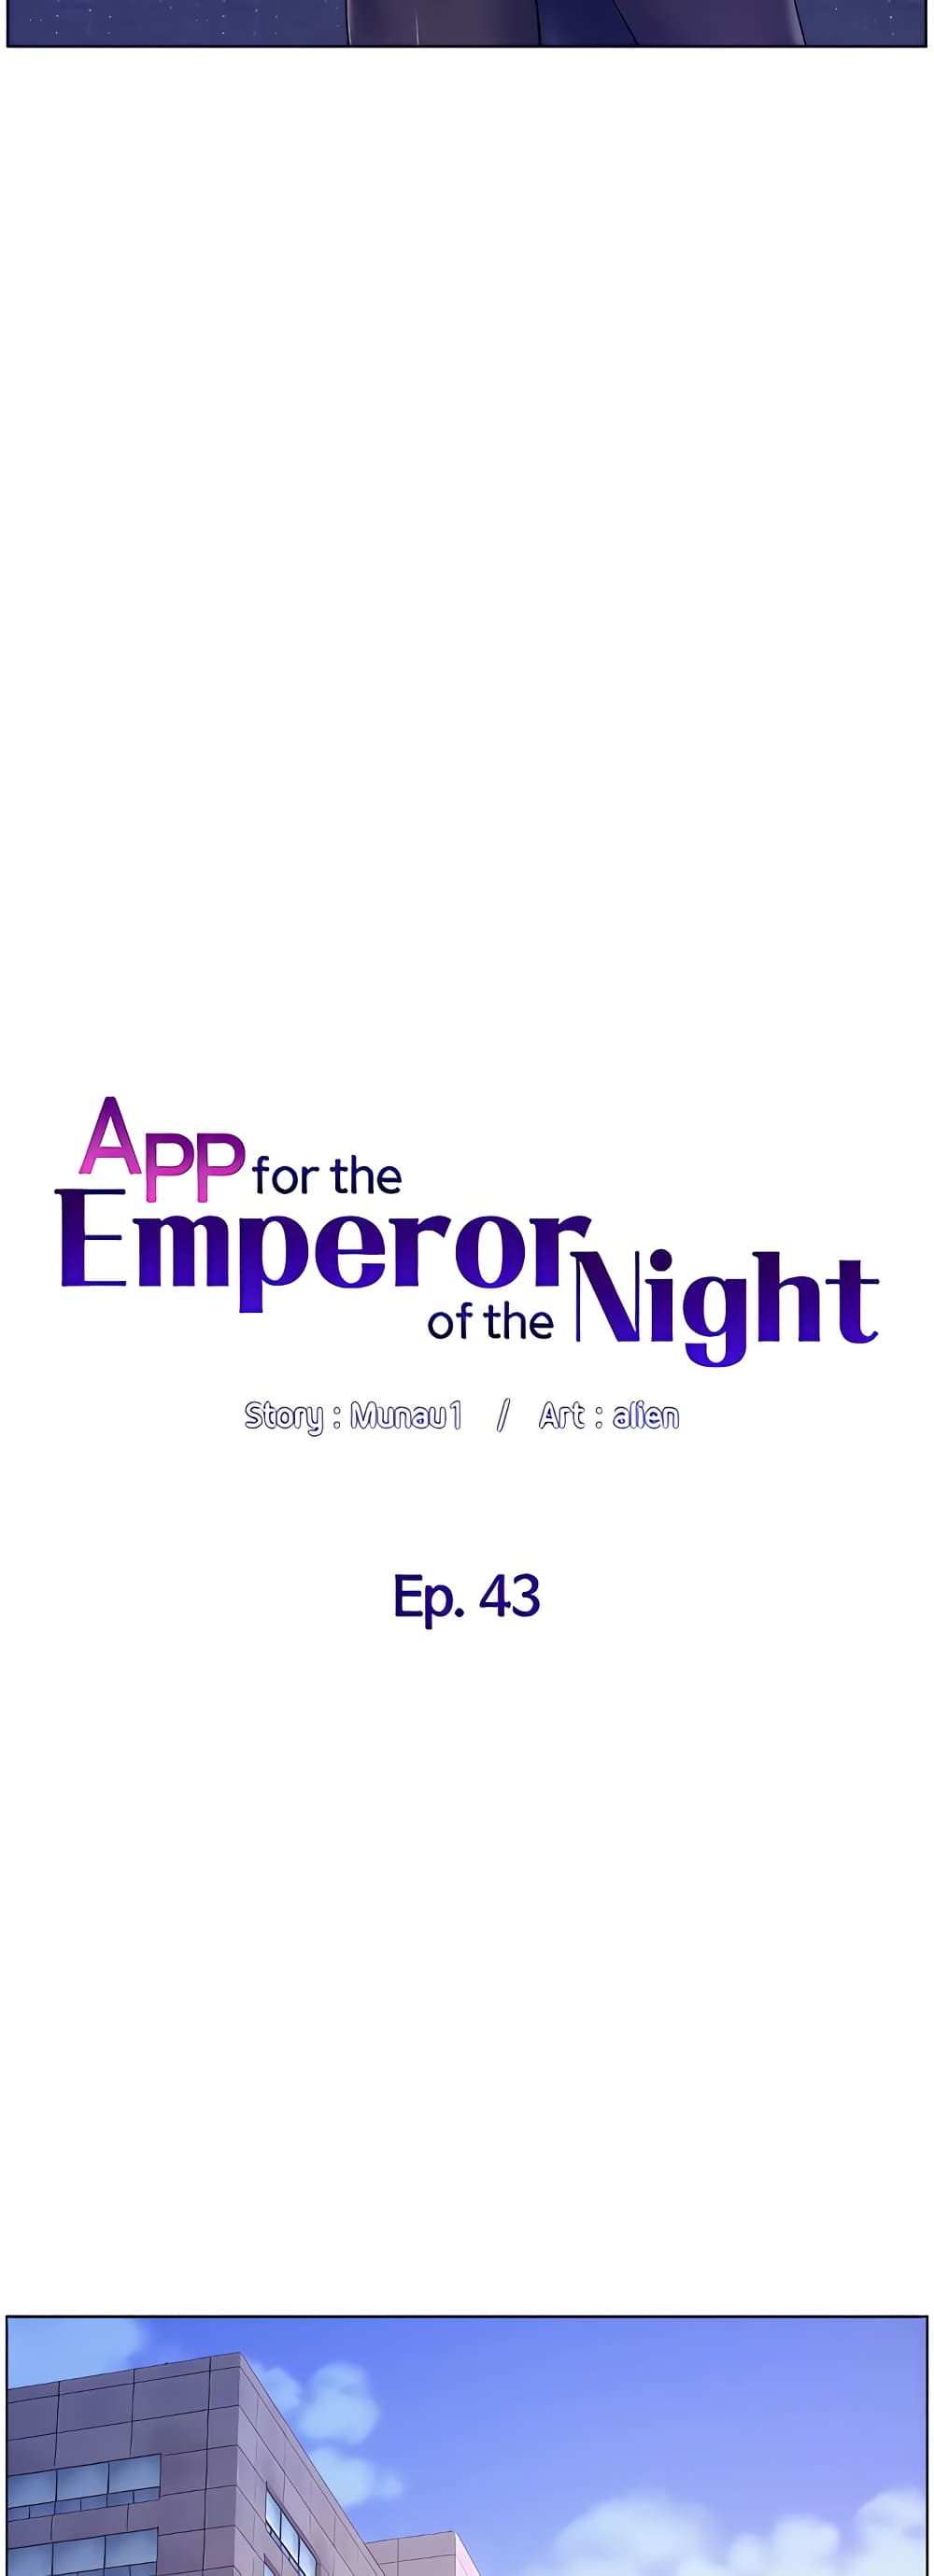 APP for the Emperor of the Night 43-43